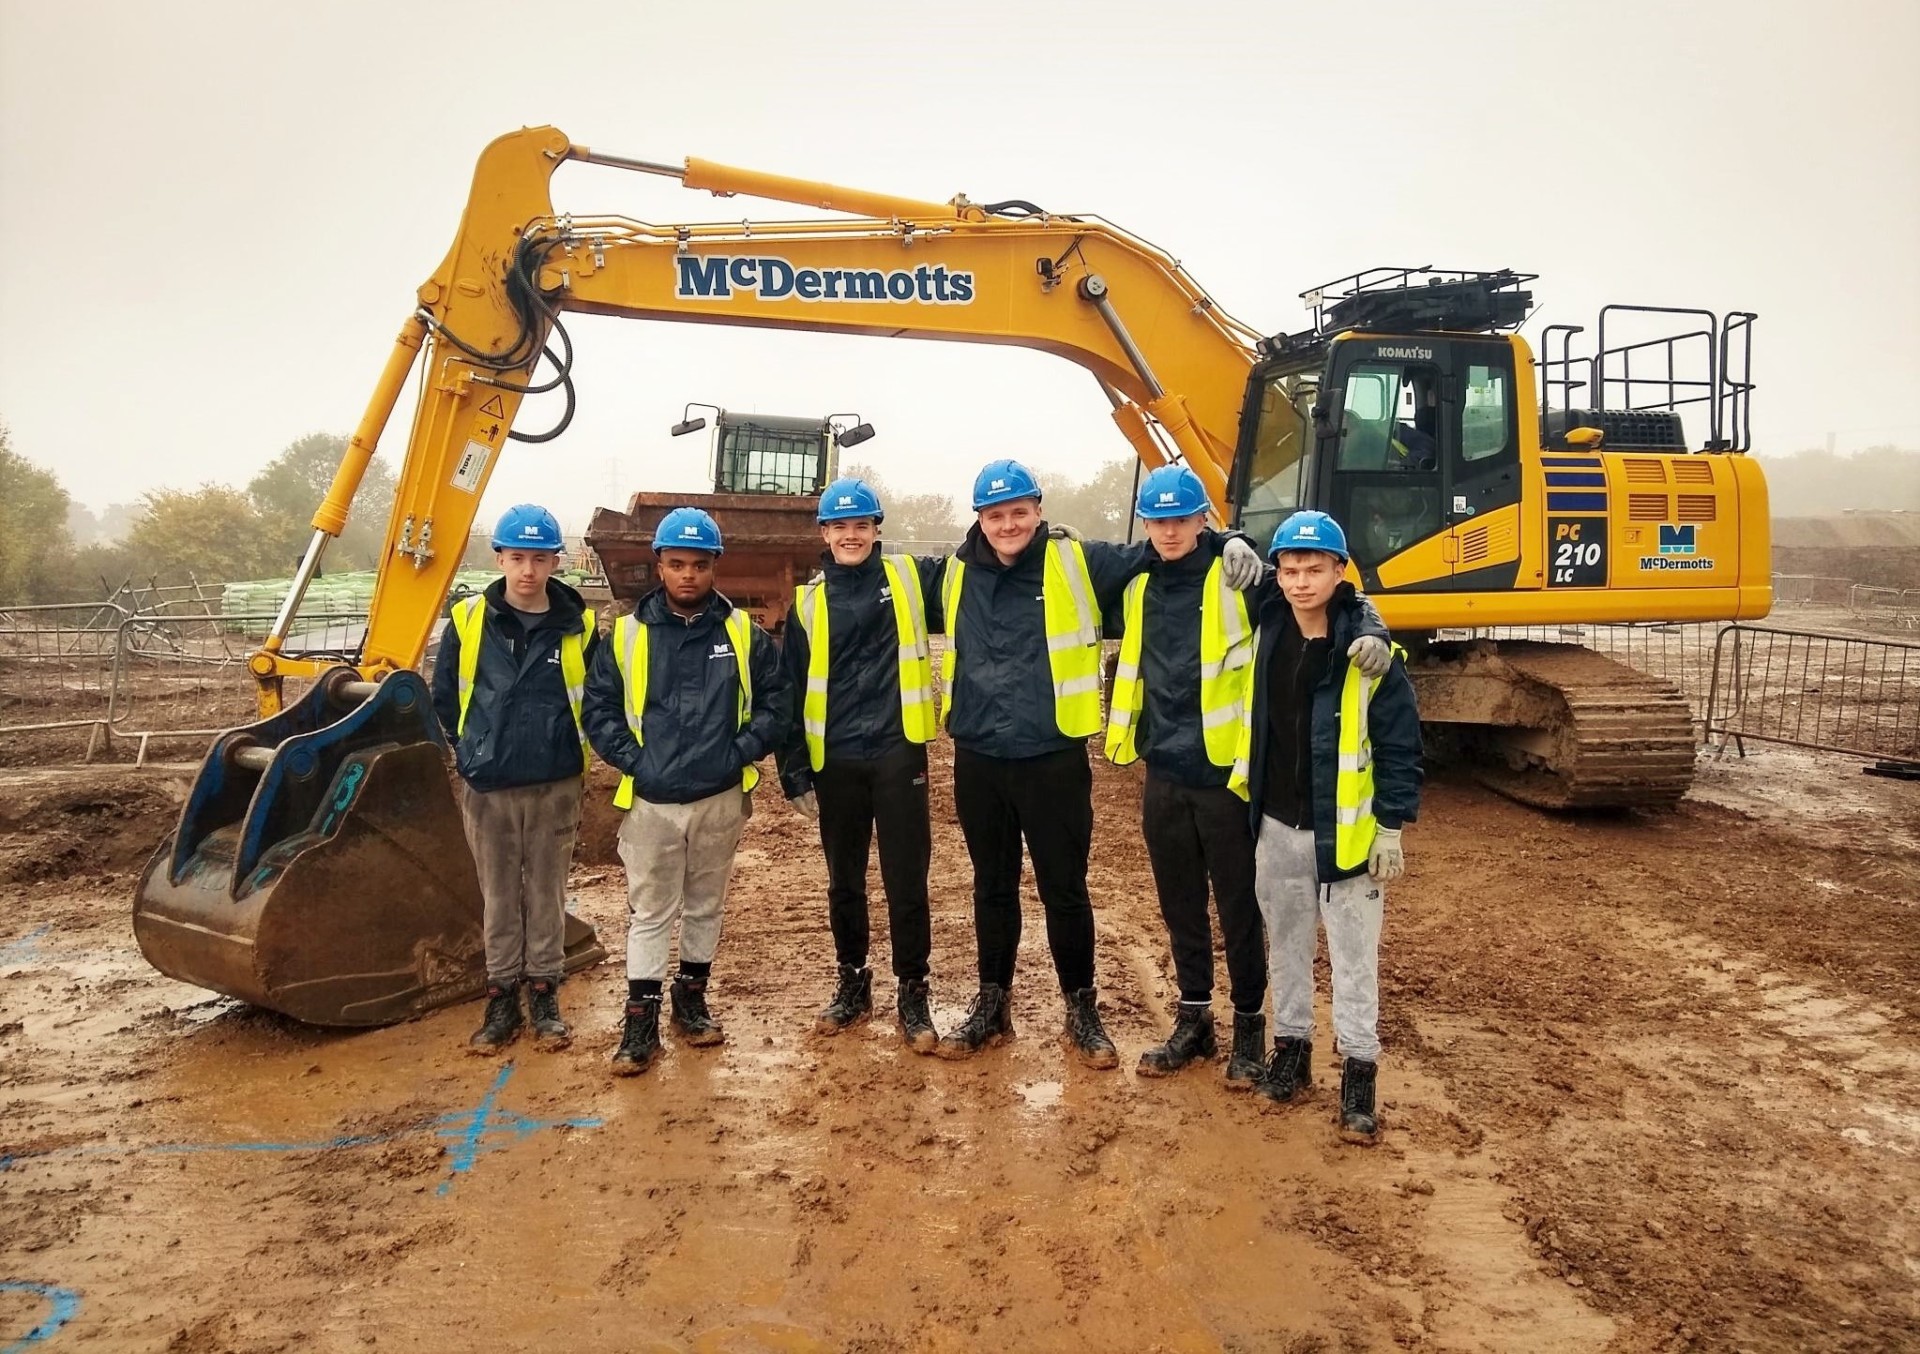 We have welcomed six apprentices to McDermotts this month, who are undertaking a Level 2 Apprenticeship in groundworks